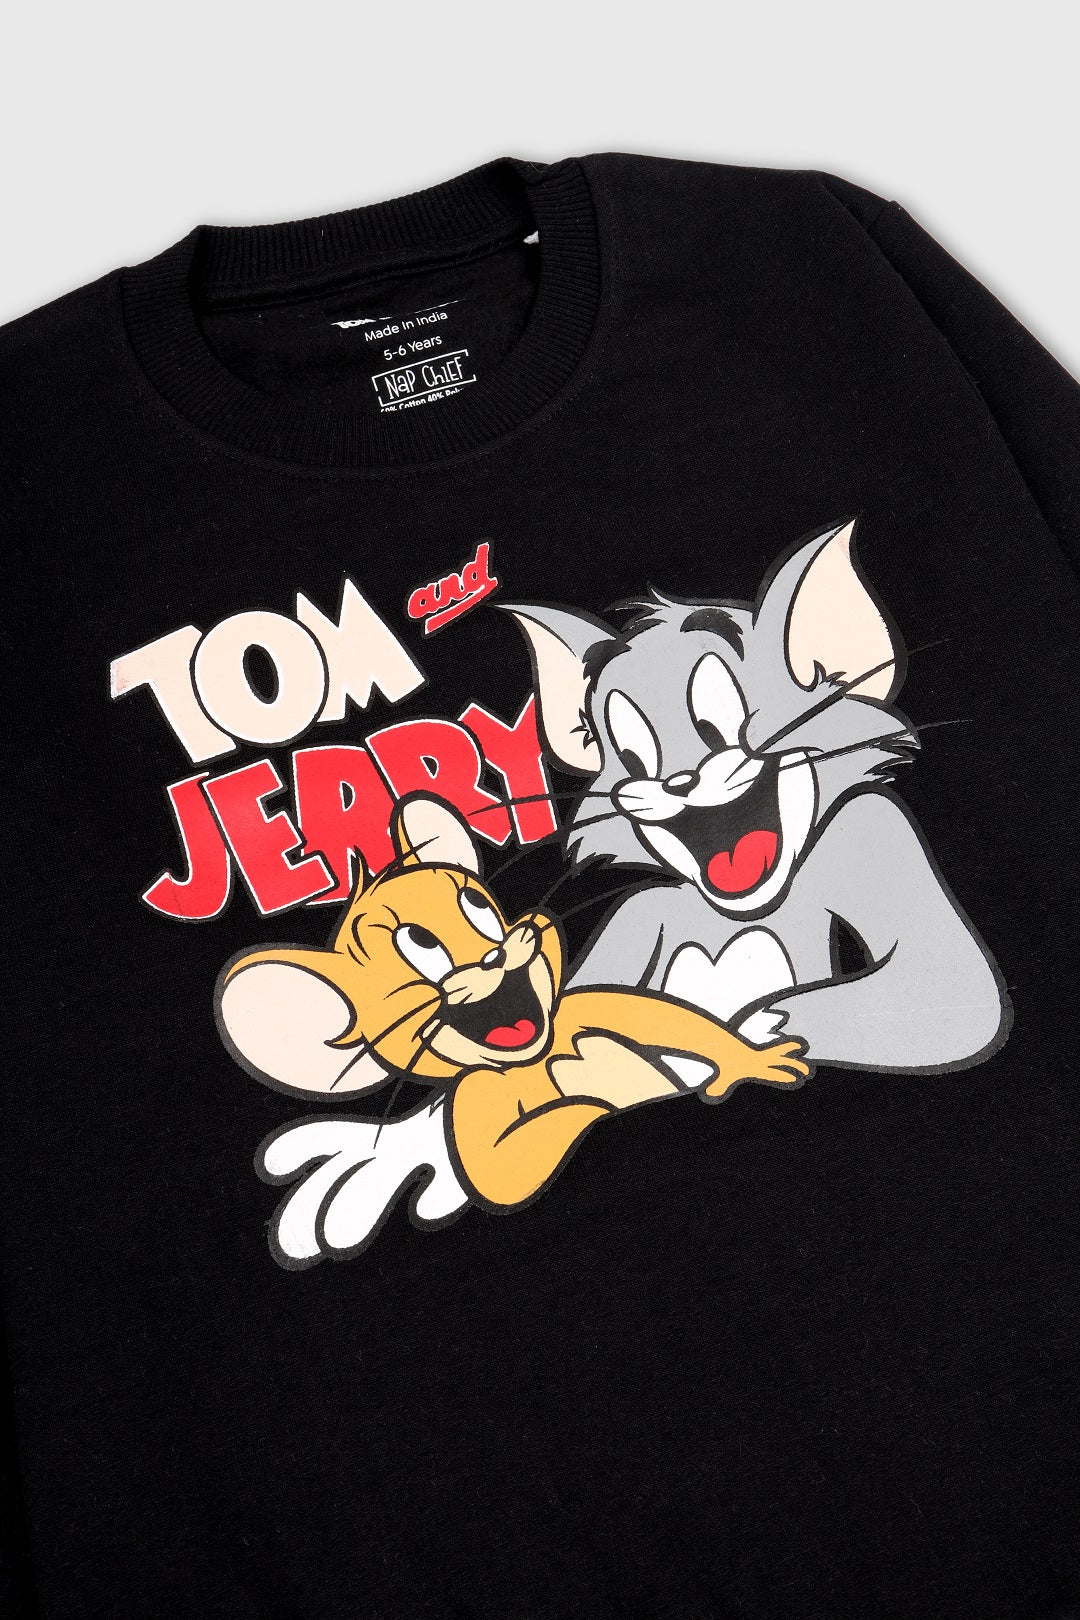 Tom & Jerry Double Trouble Co-Ord set for Family